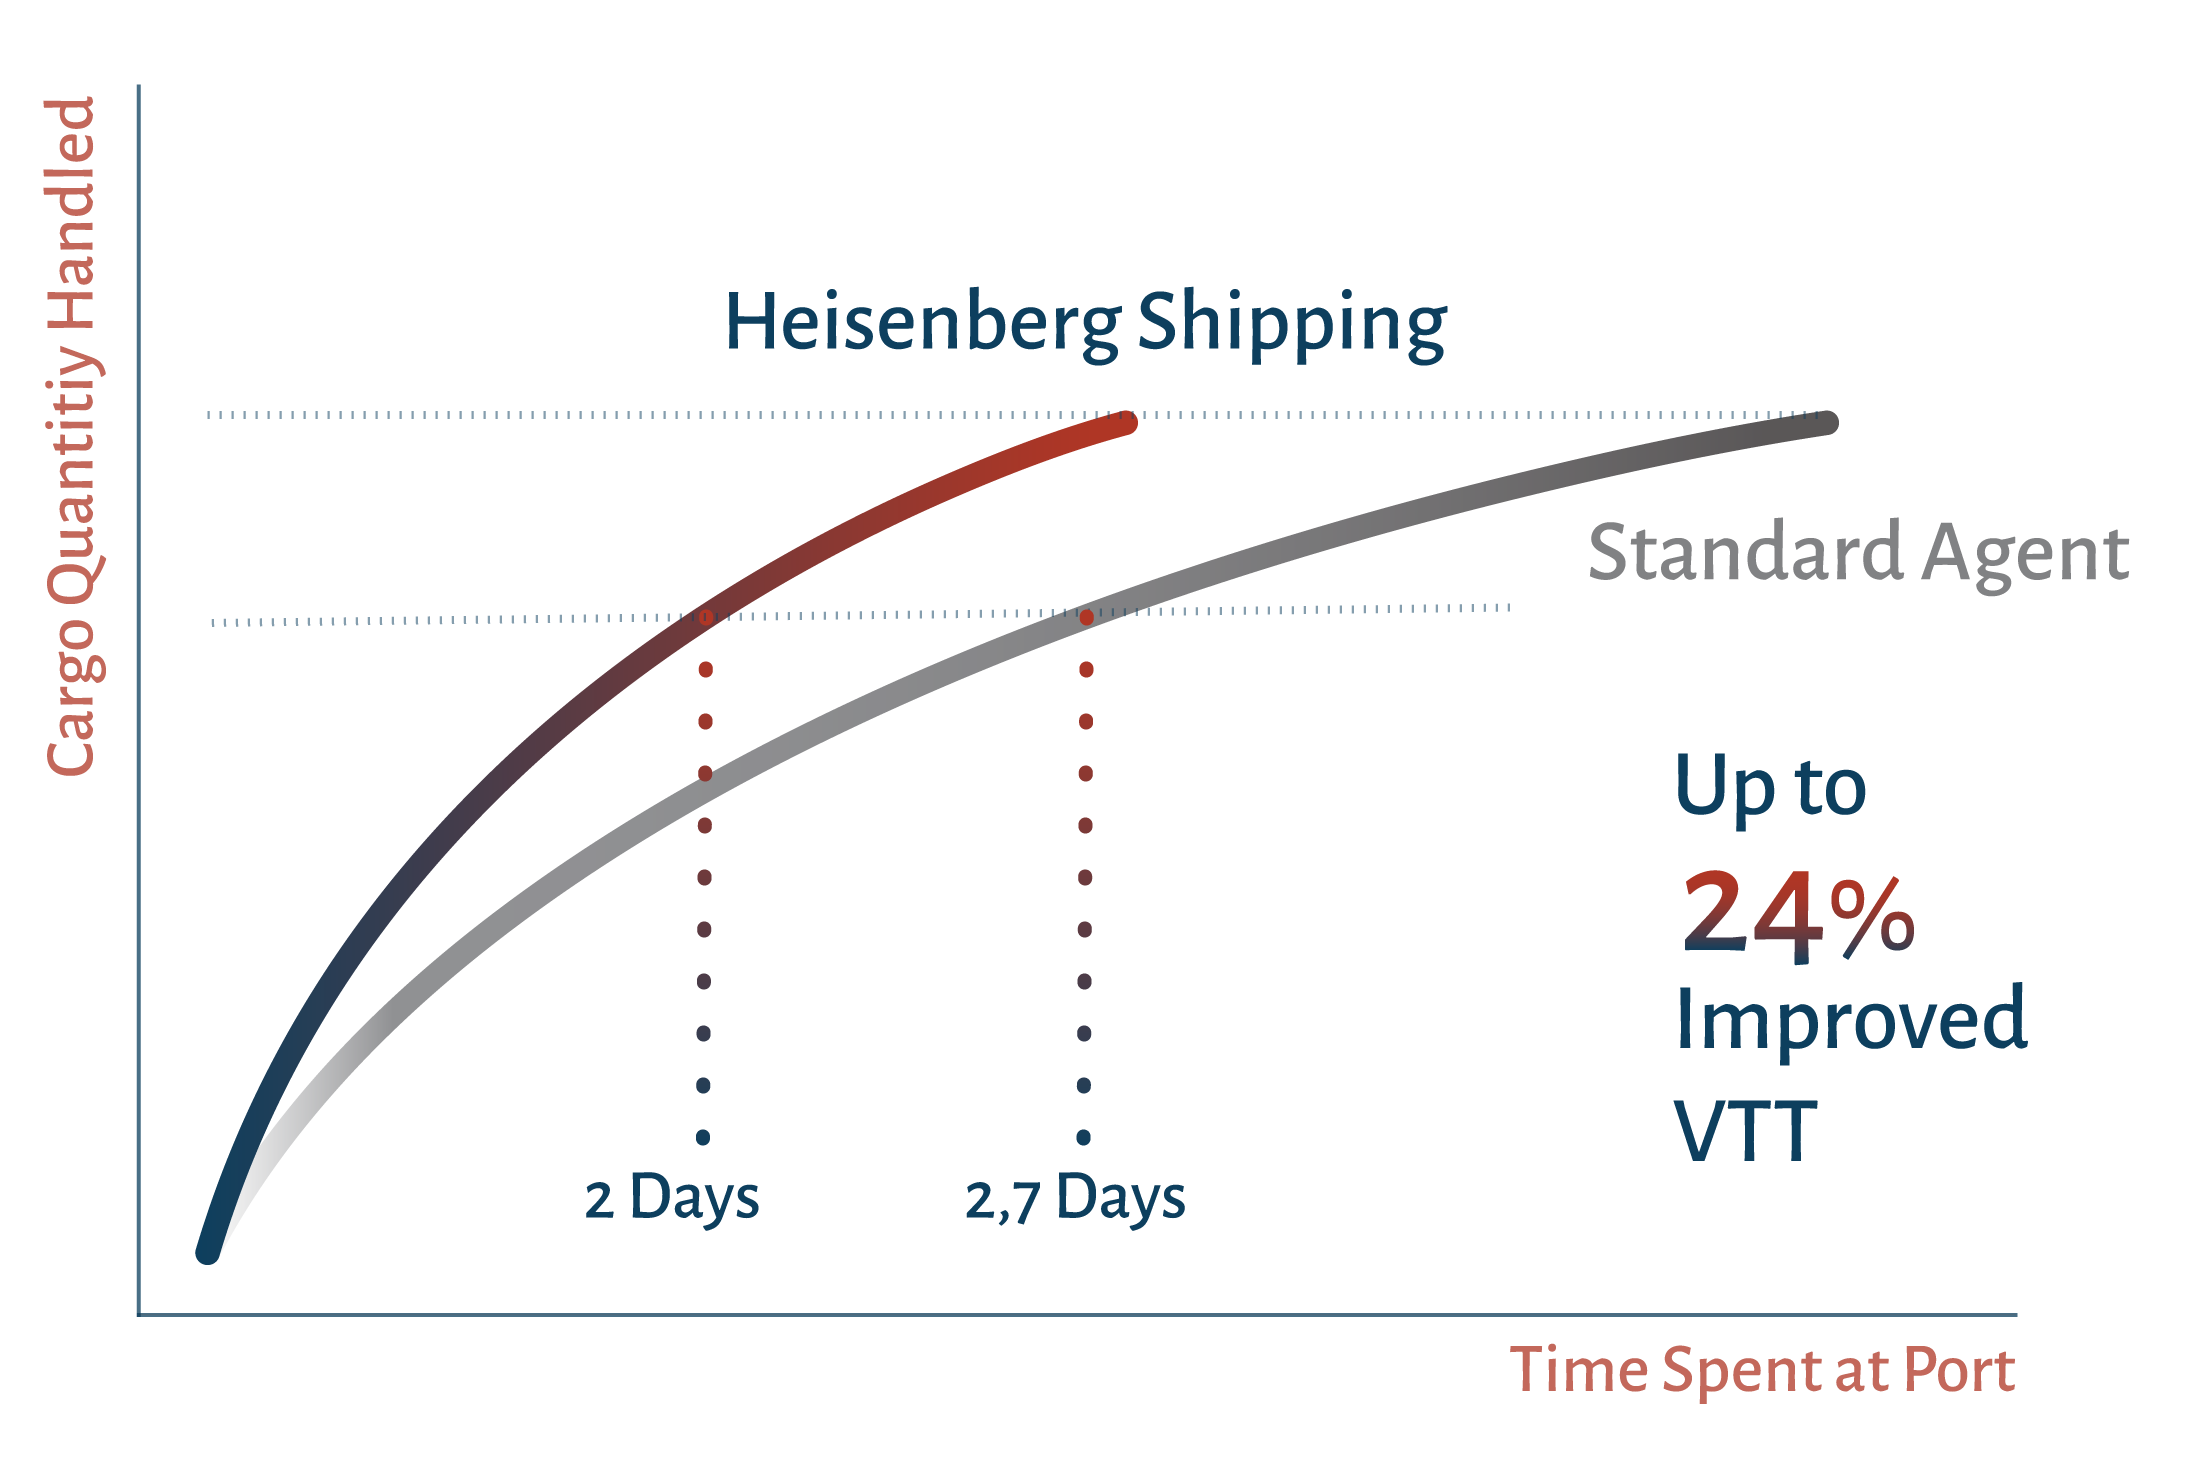 In this chart, it shows how Heisenberg Shipping increases the Vessel Turnaround Time compared to other standard ship agents.